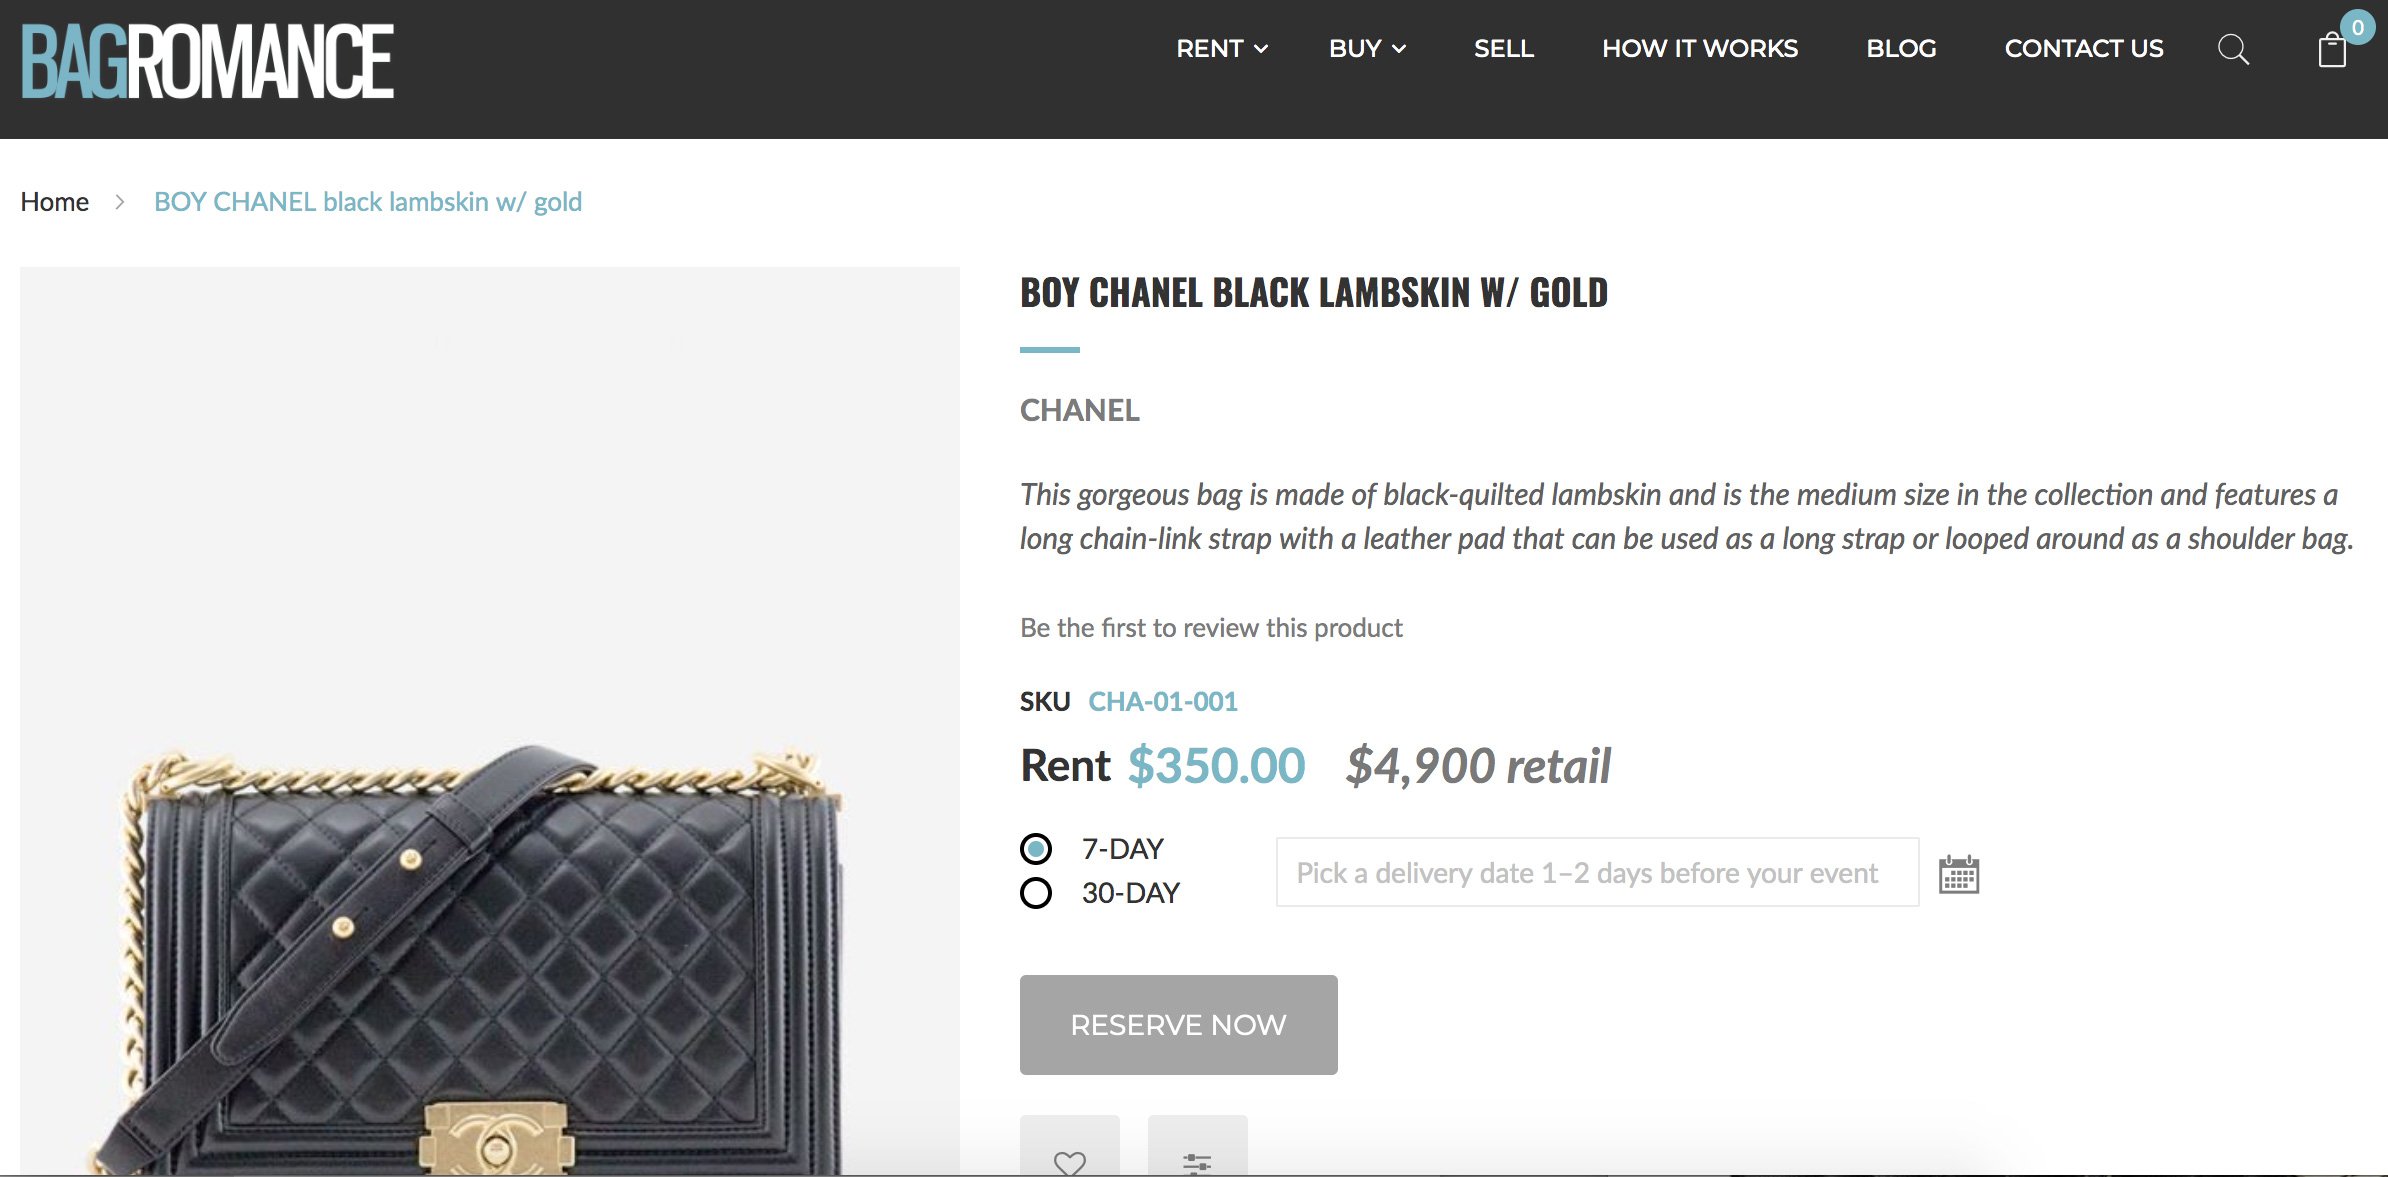 How To Rent A Chanel Bag